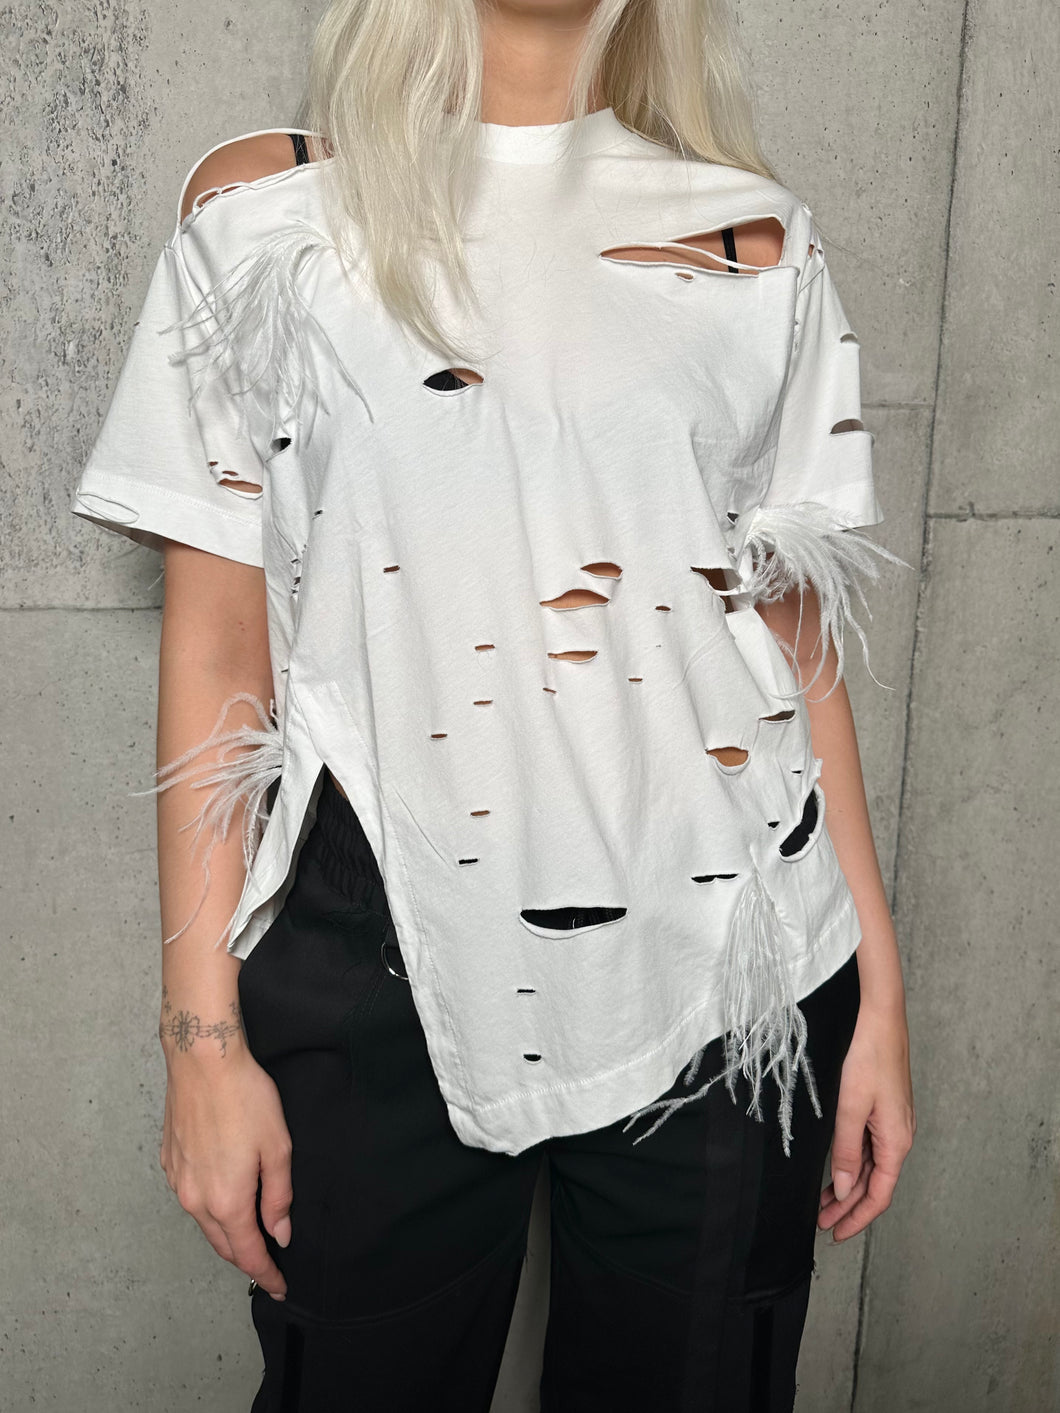 Distressed T-Shirt With Feathers - White